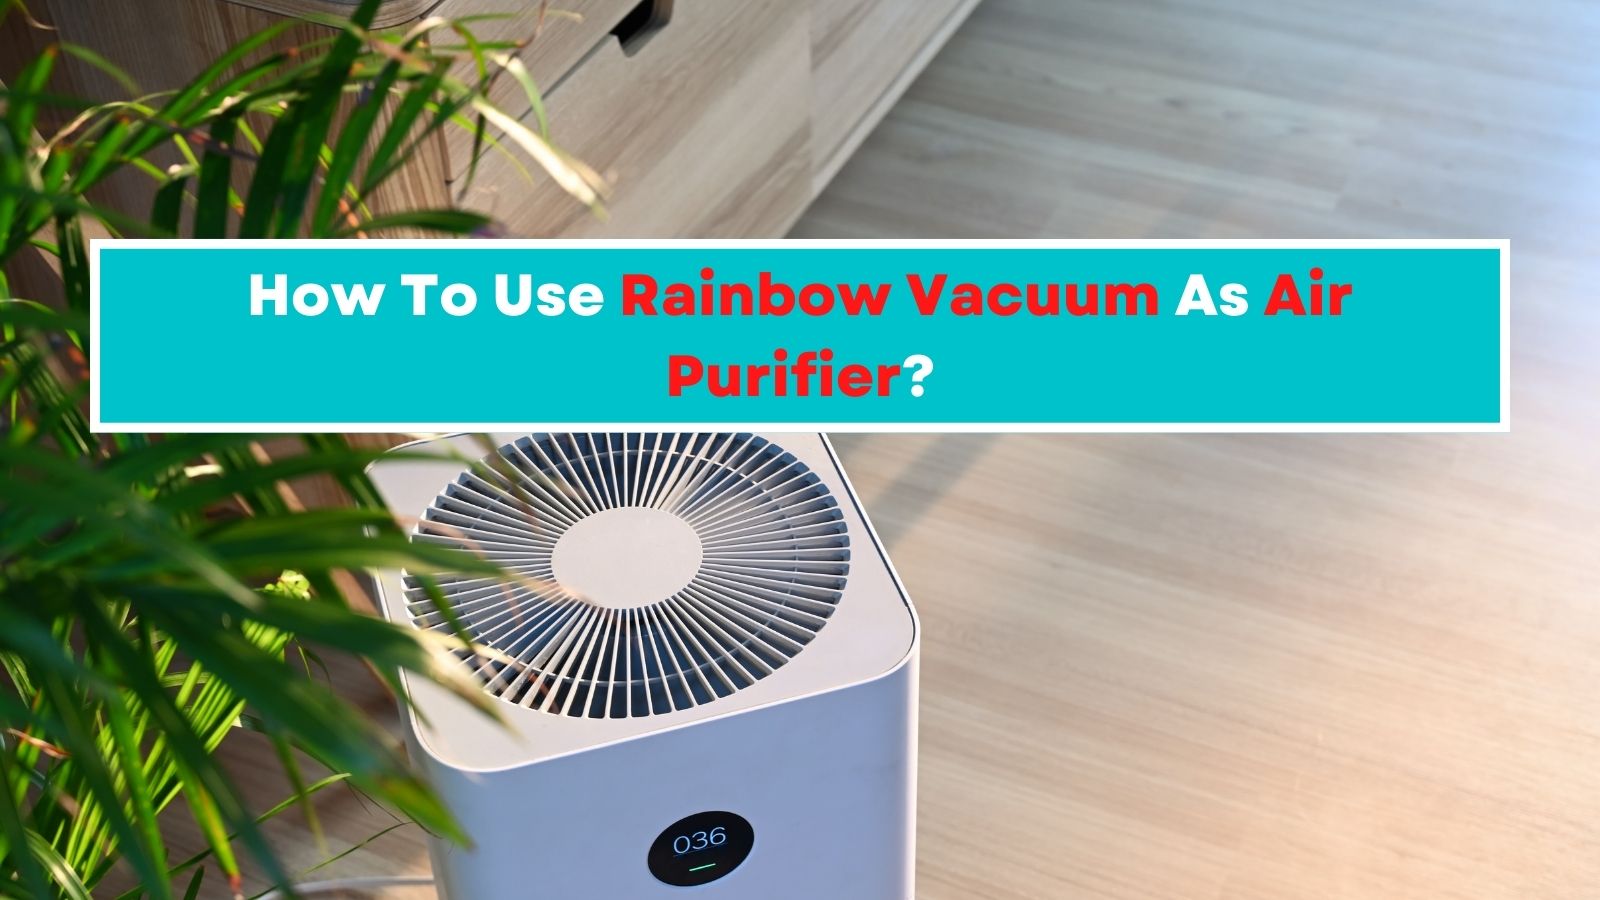 How To Use Rainbow Vacuum As Air Purifier?